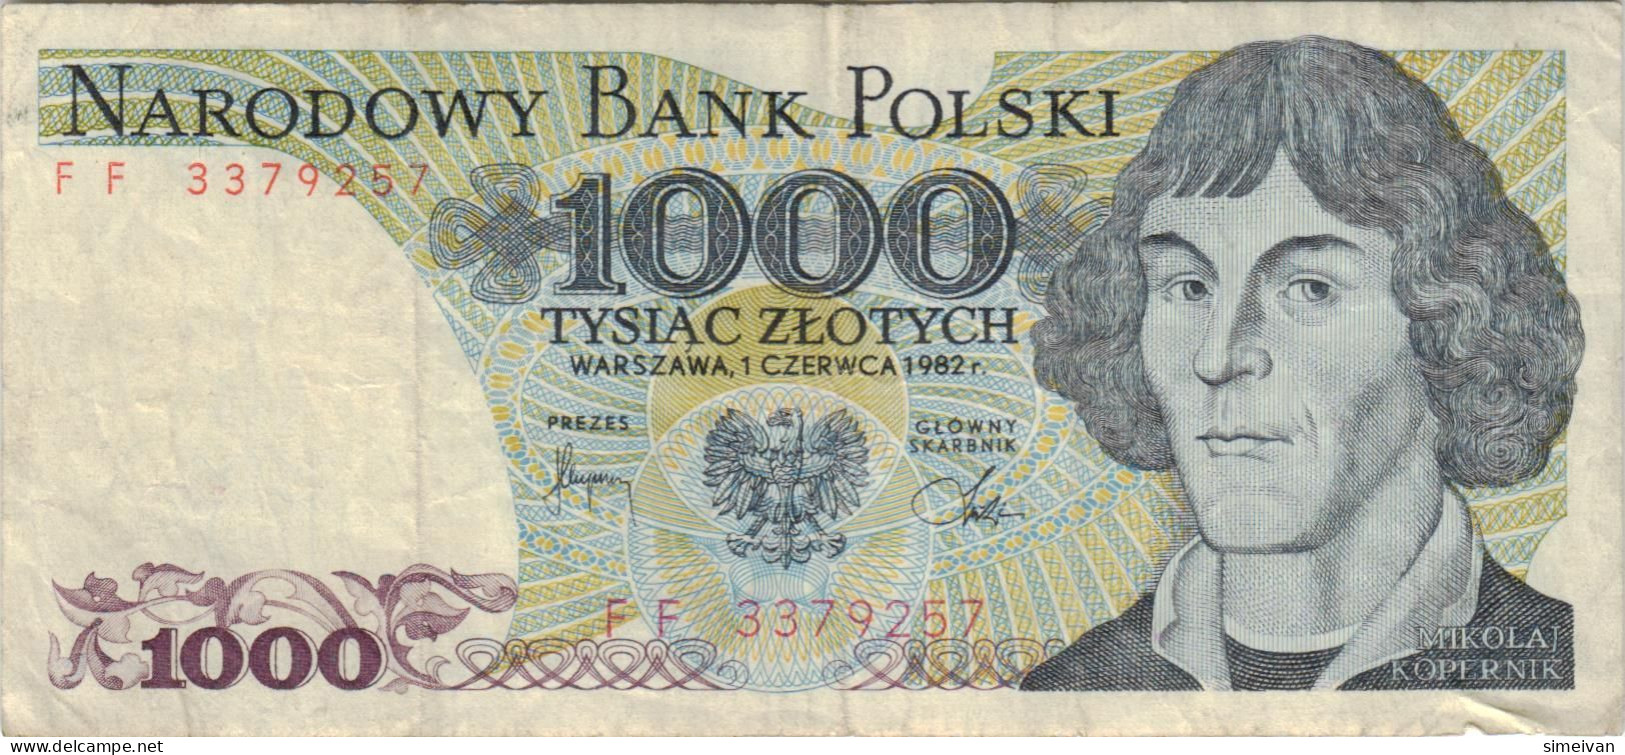 Poland 1000 Zlotych 1975 P-146a Banknote Europe Currency Pologne Polen #5315 - Polonia